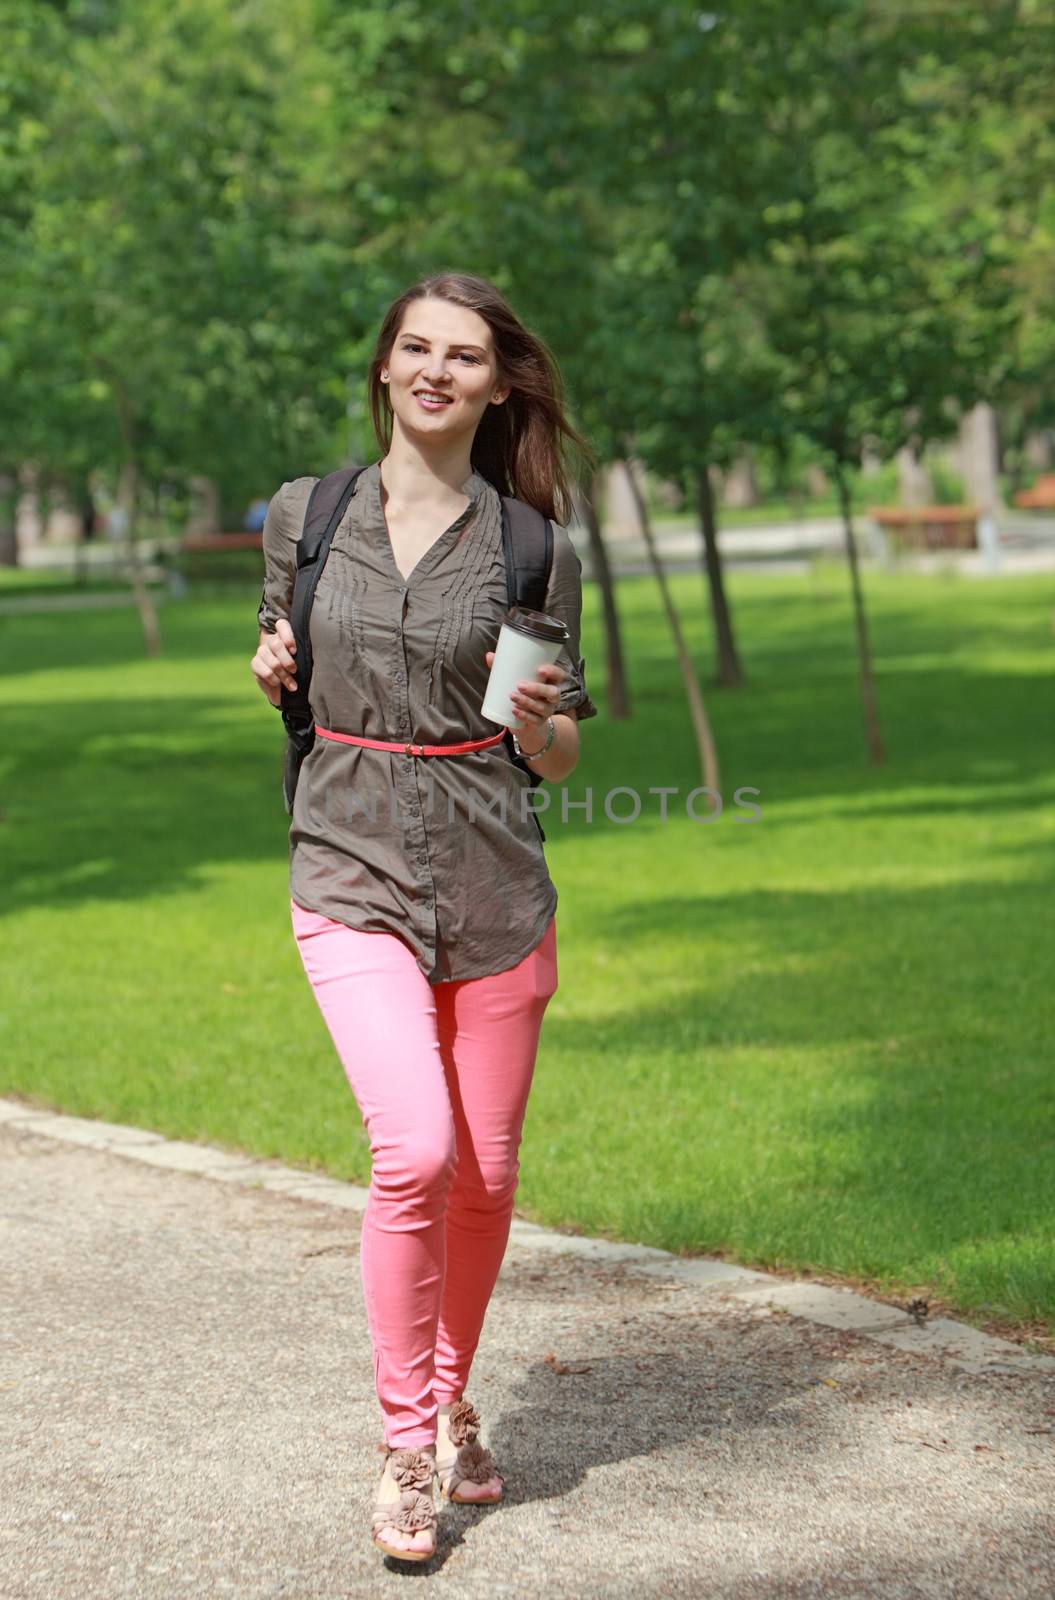 Young Woman Running in a Park by RazvanPhotography